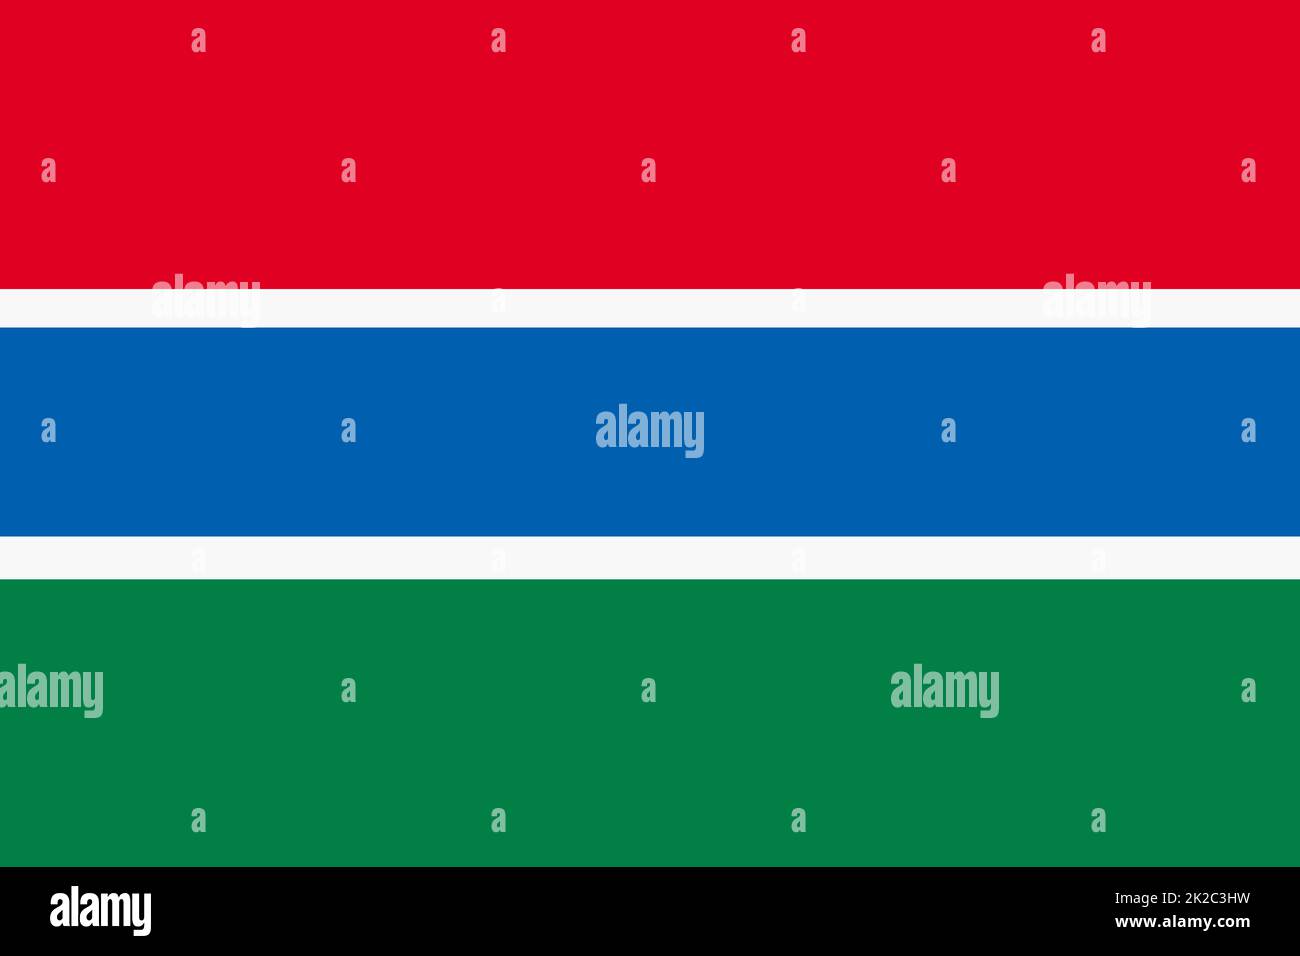 Gambia flag background illustration red white blue green Stock Photo